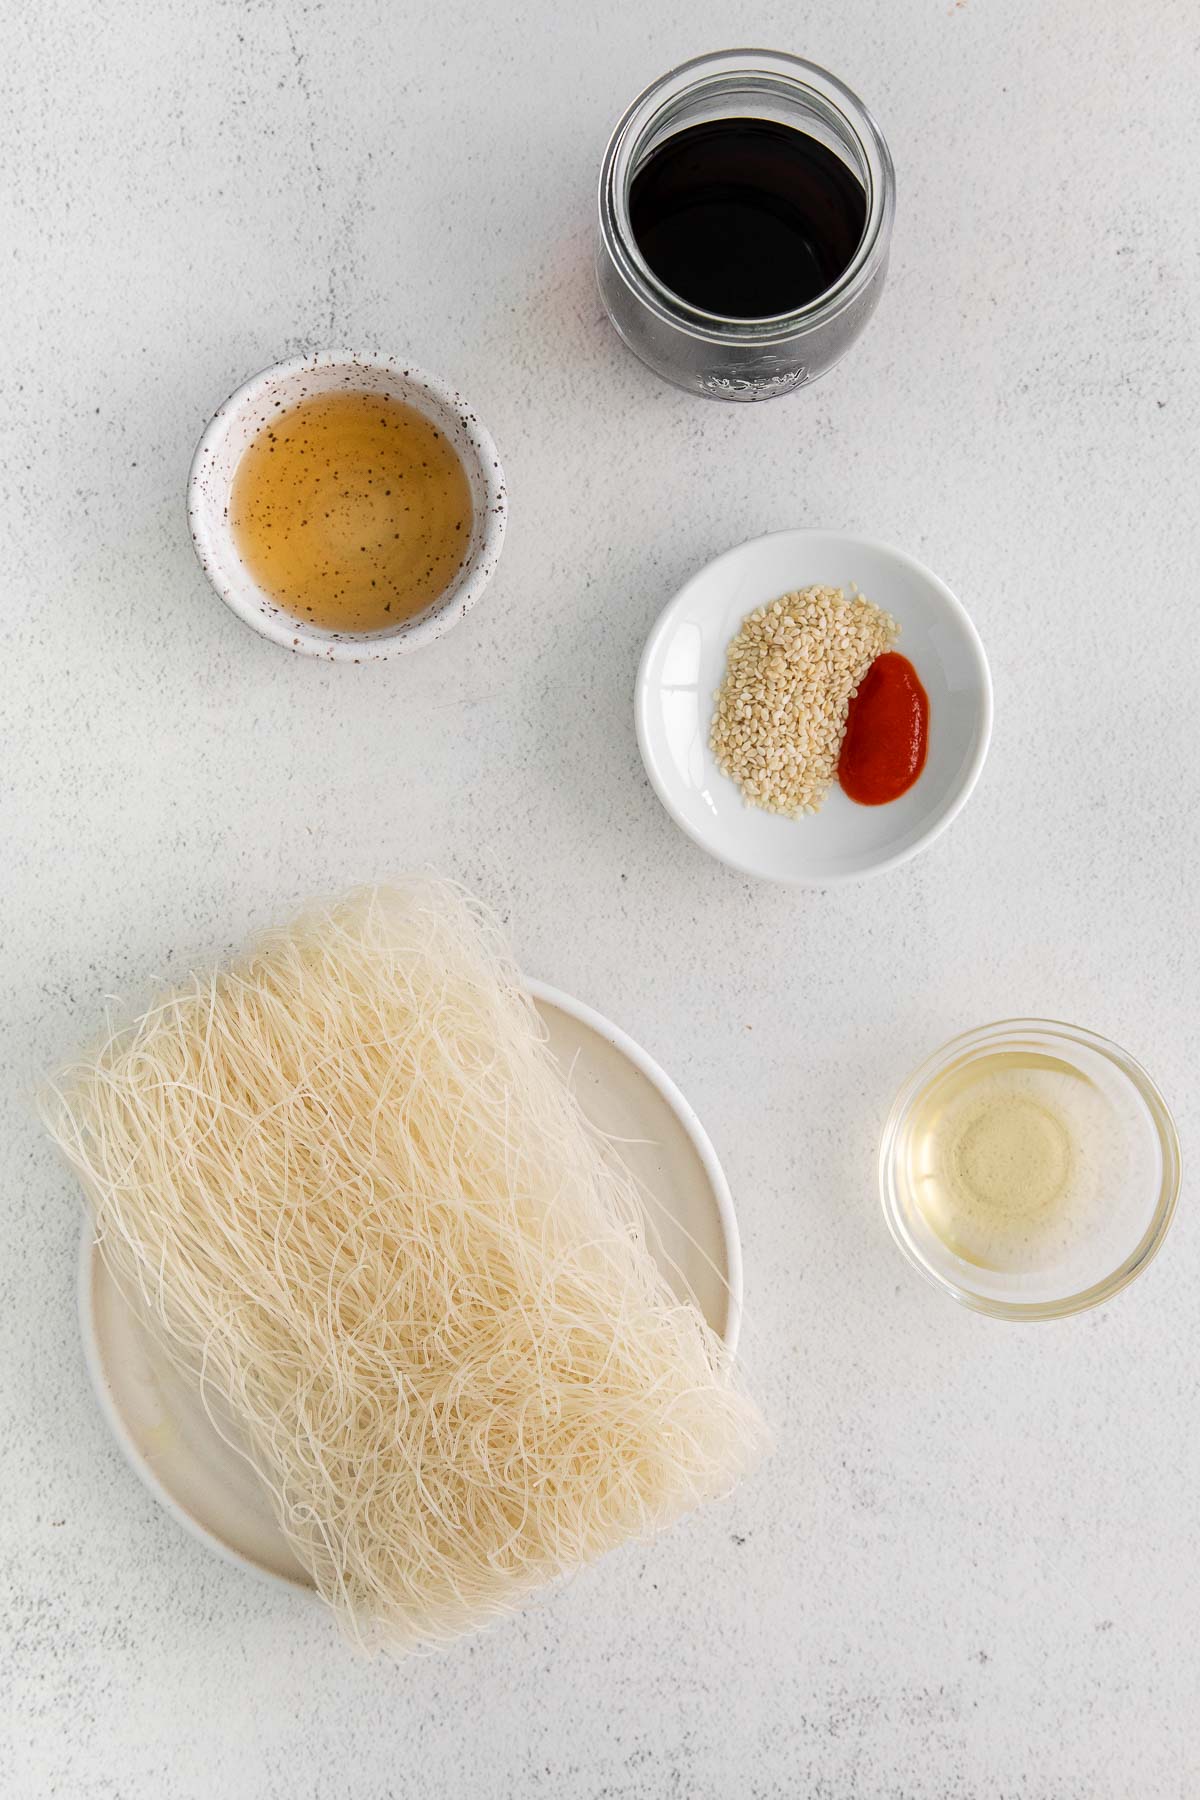 uncooked rice noodles on a white plate and small bowls of soy sauce, sesame oil and spices